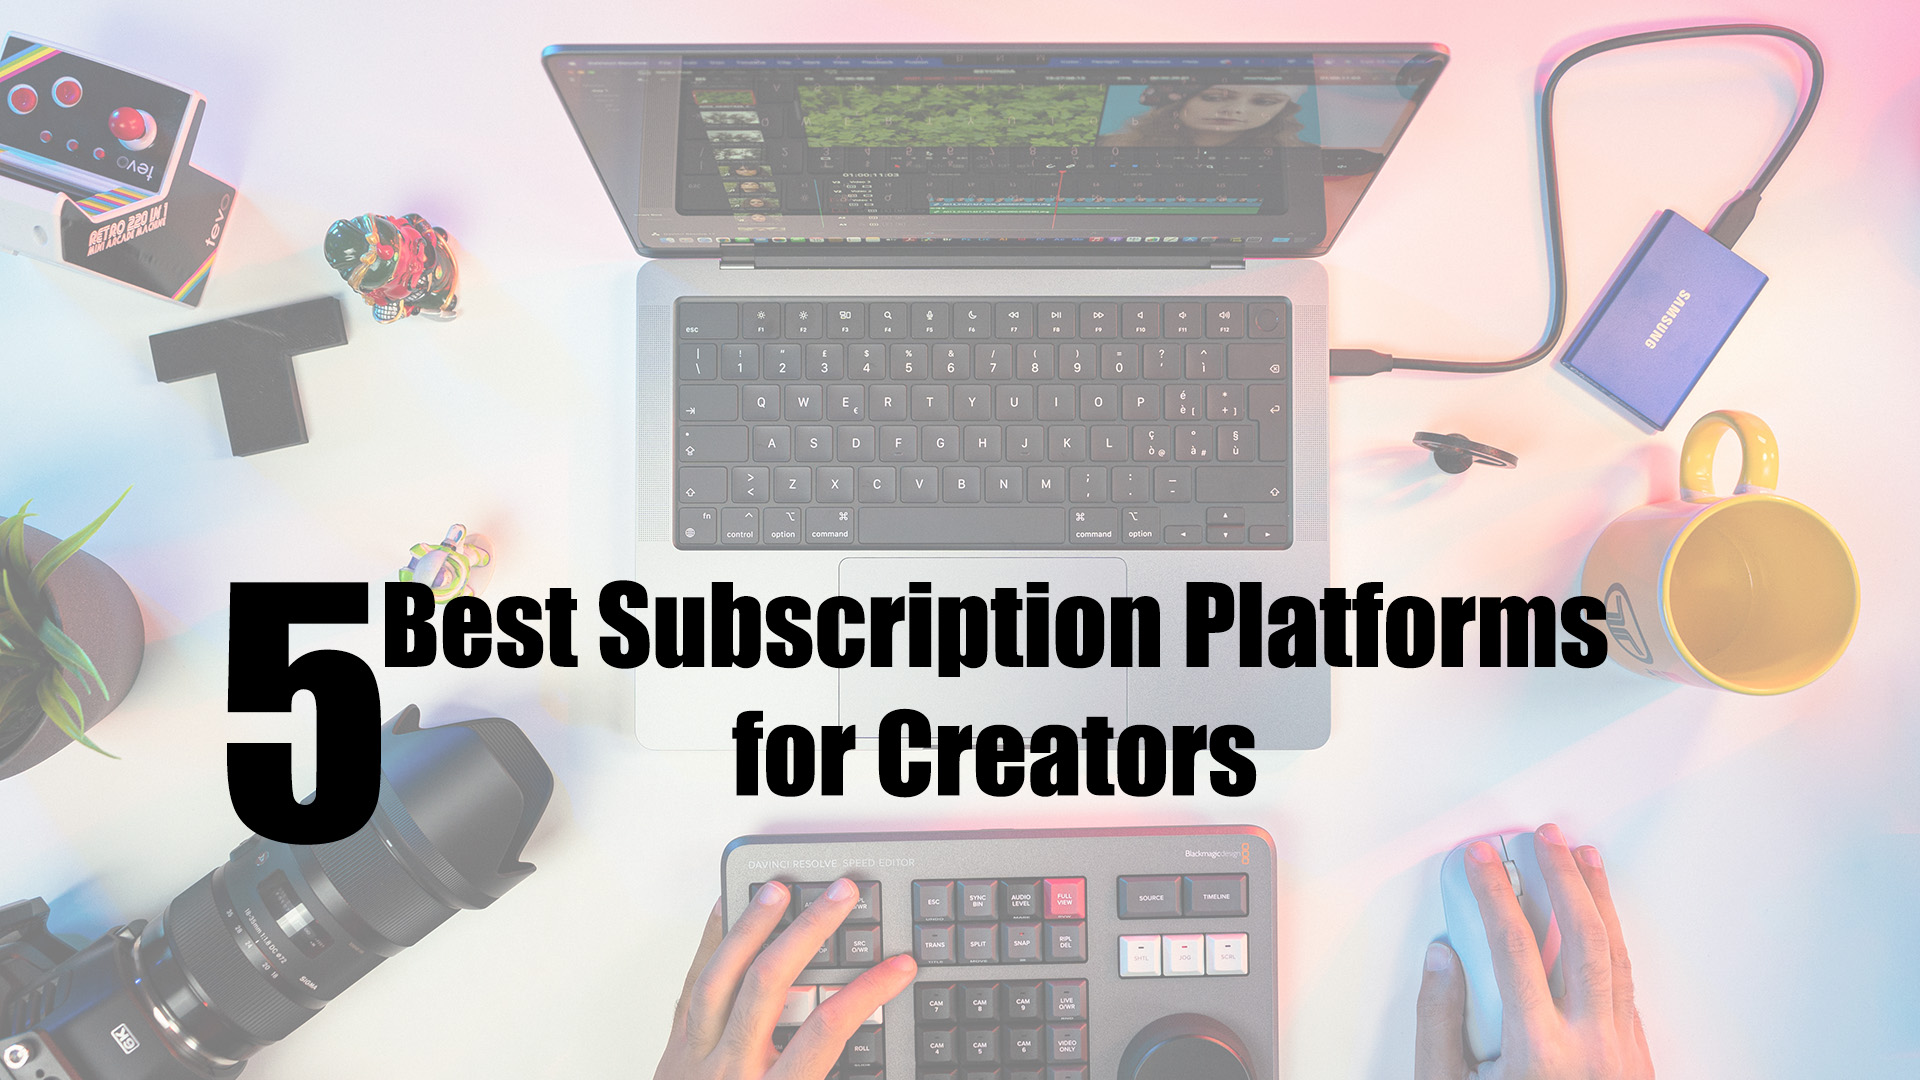 The 5 best subscription platforms for creators in 2022